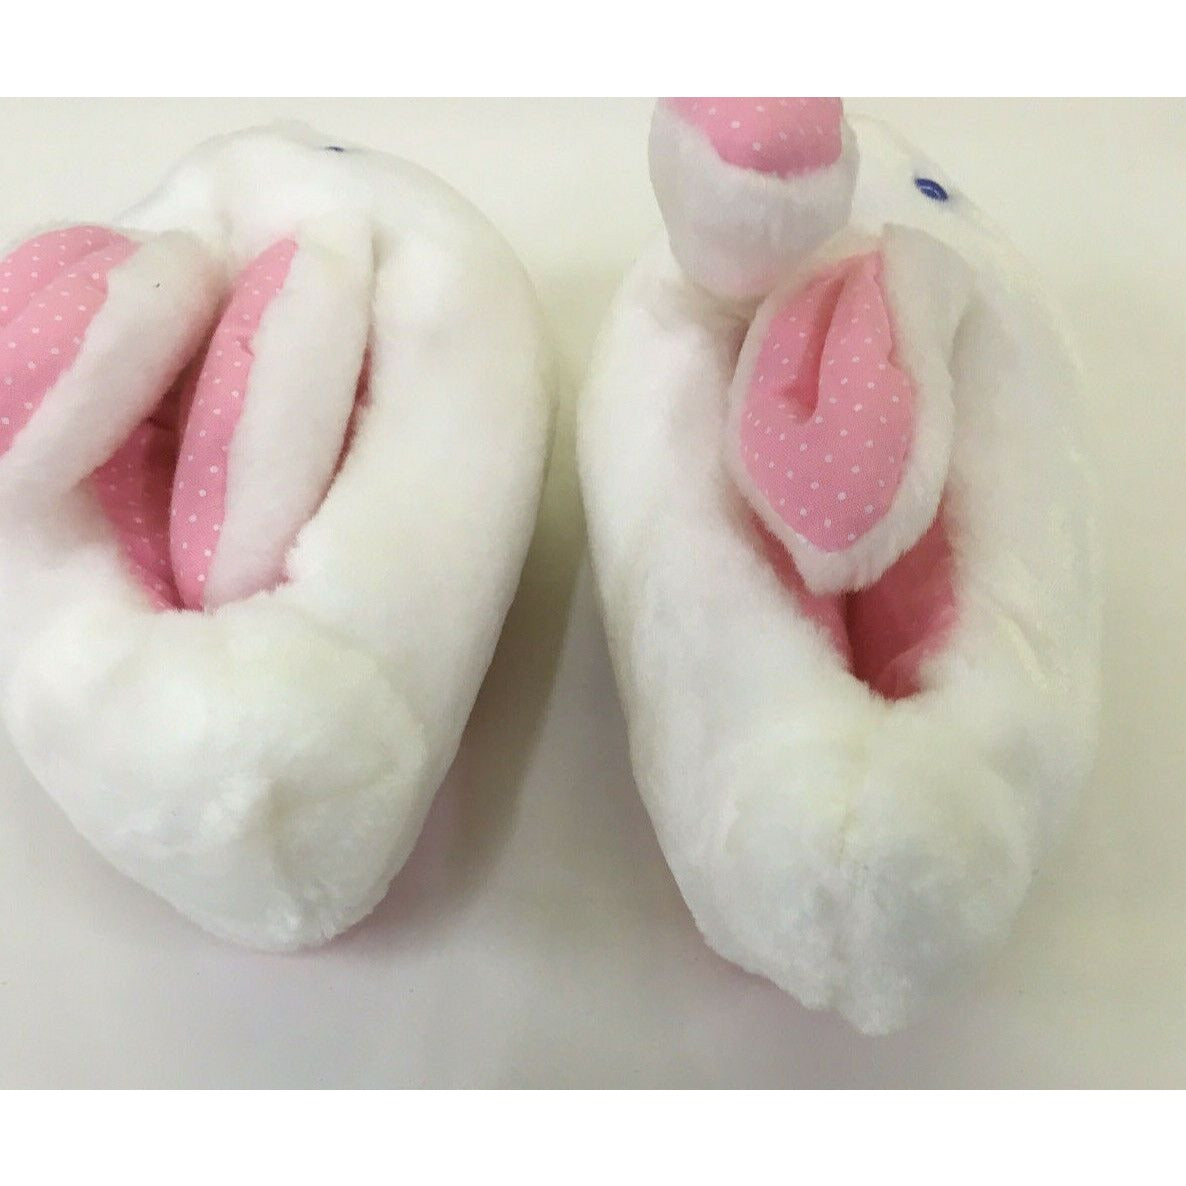 TEDDY TOES PLUSH SLIPPERS White Blue Eyed Bunnies- Rabbit Shoes